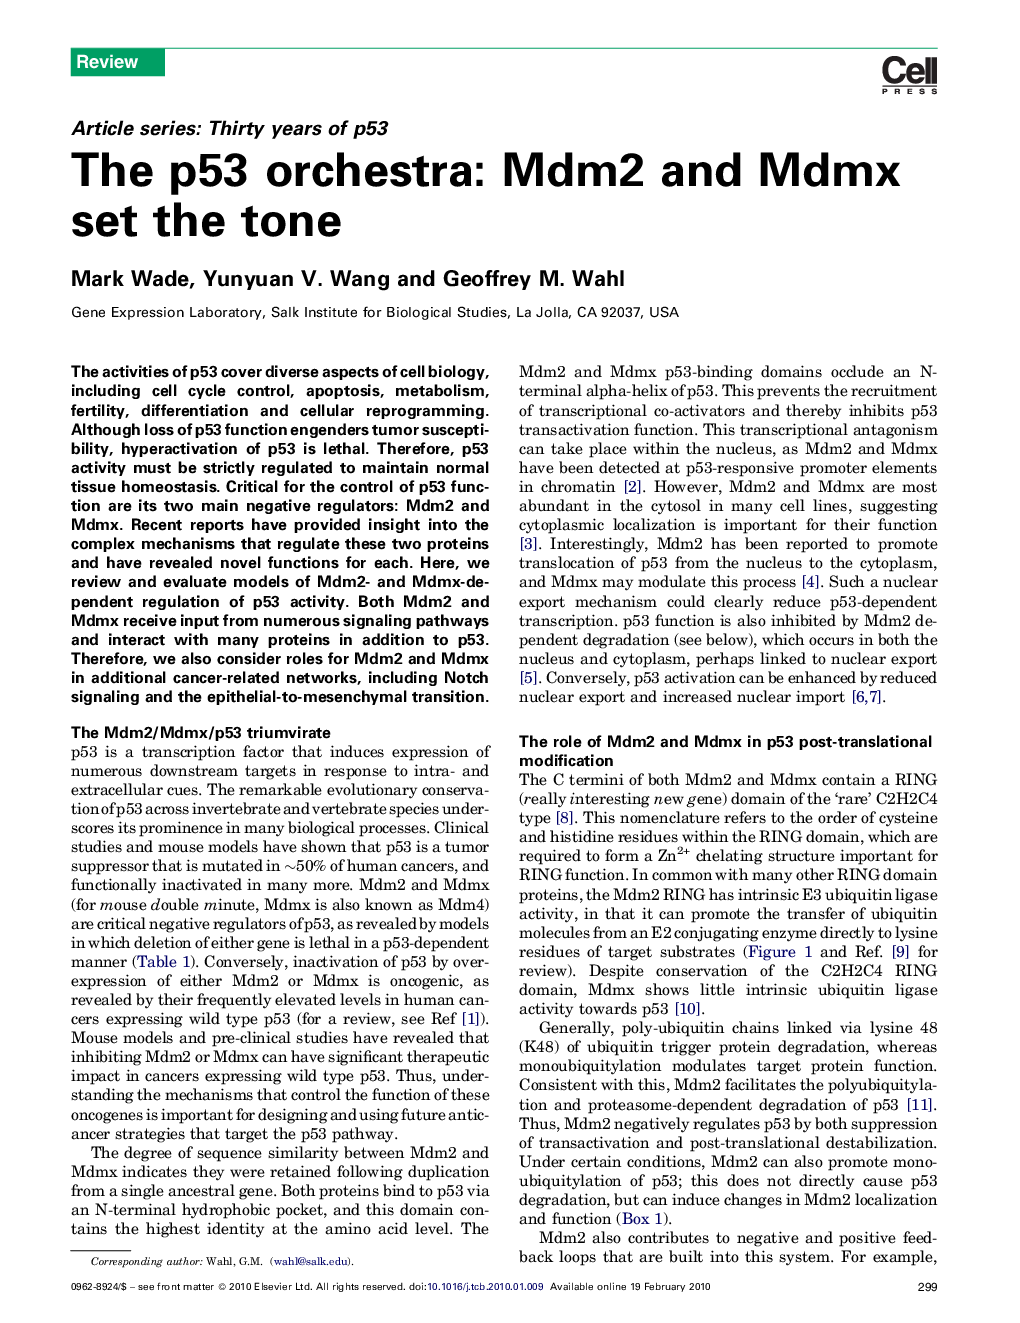 The p53 orchestra: Mdm2 and Mdmx set the tone